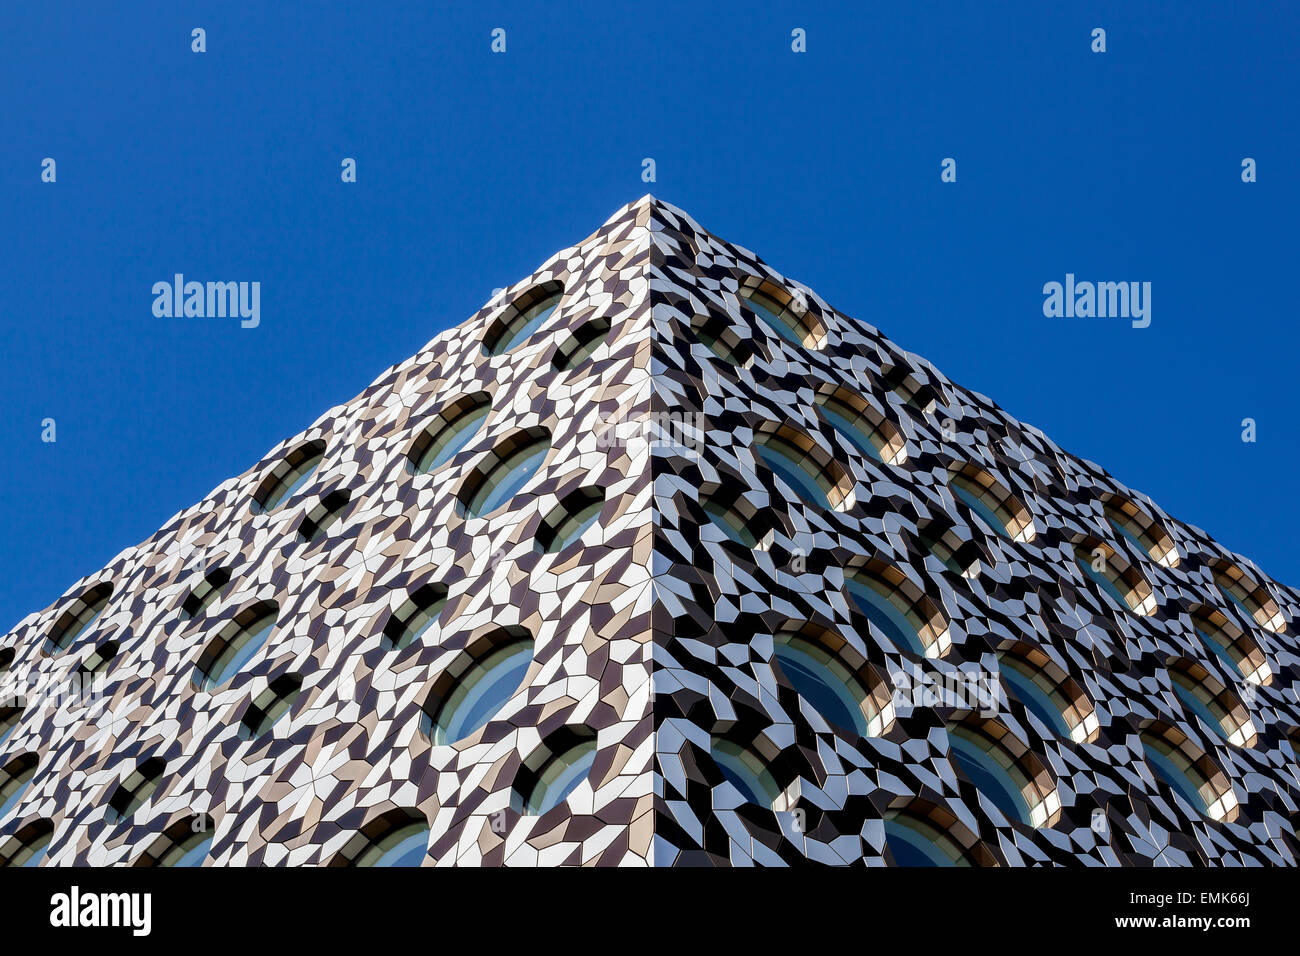 Detail of the facade of the Ravensbourne College of Design and Communication, Greenwich, London, England, United Kingdom Stock Photo